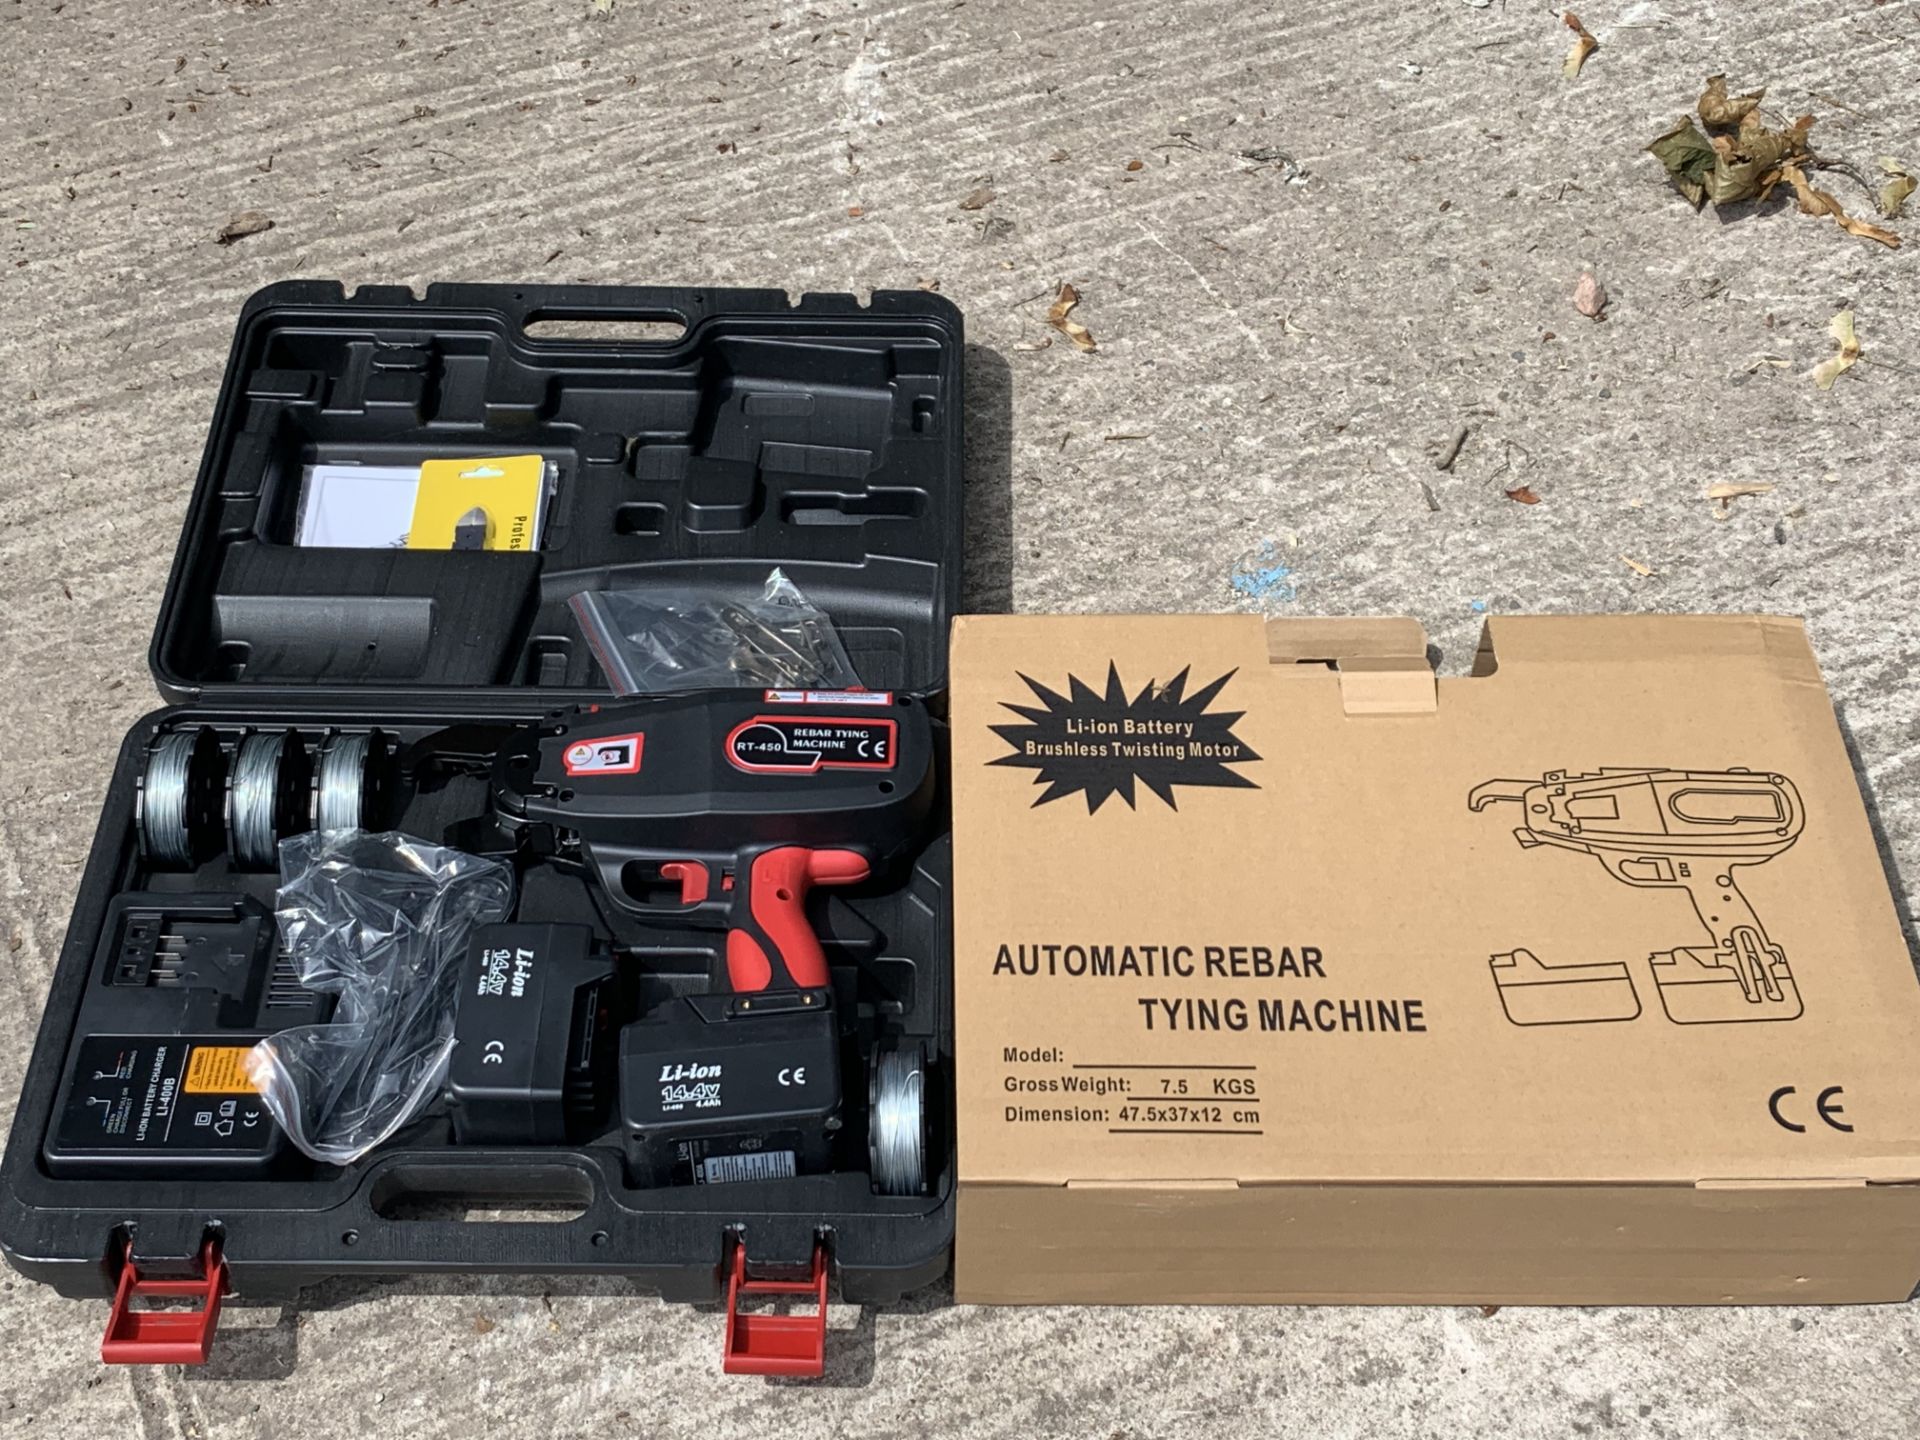 NEW BOXED RT-450 Automatic Cordless Rebar Tier Machine range from 6-45mm